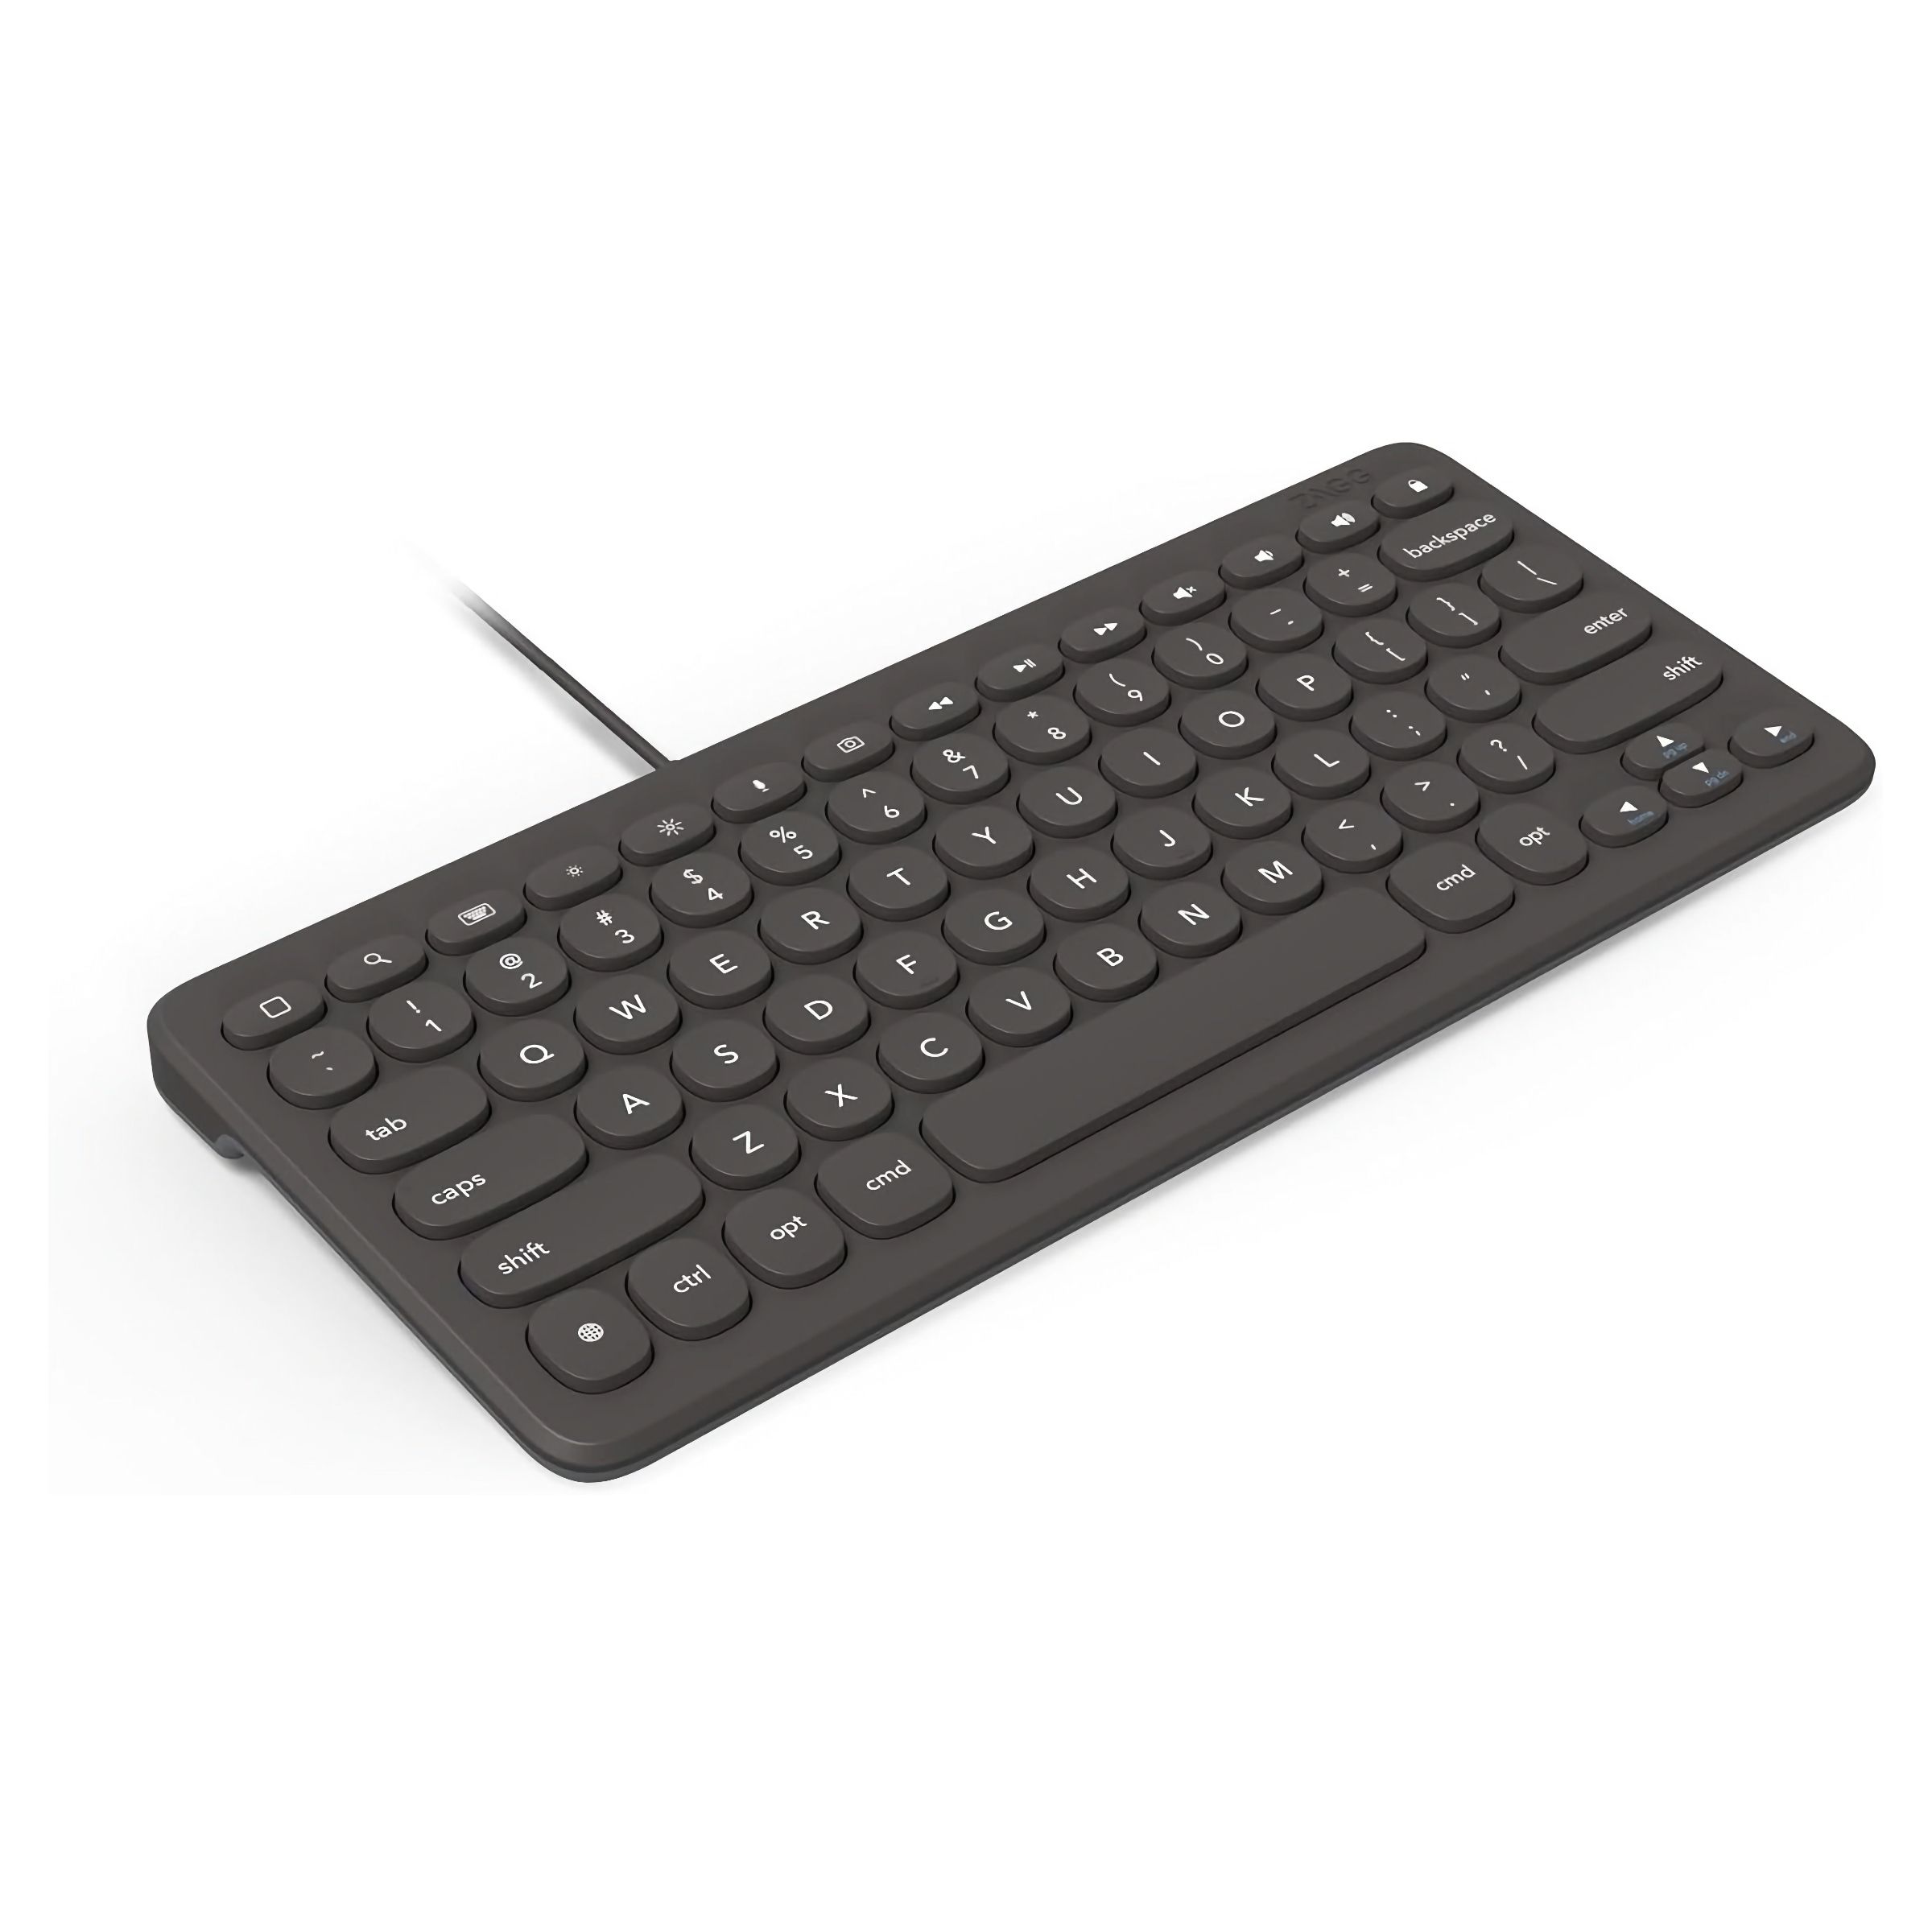 A black keyboard with circular key and a cable coming out of the top.